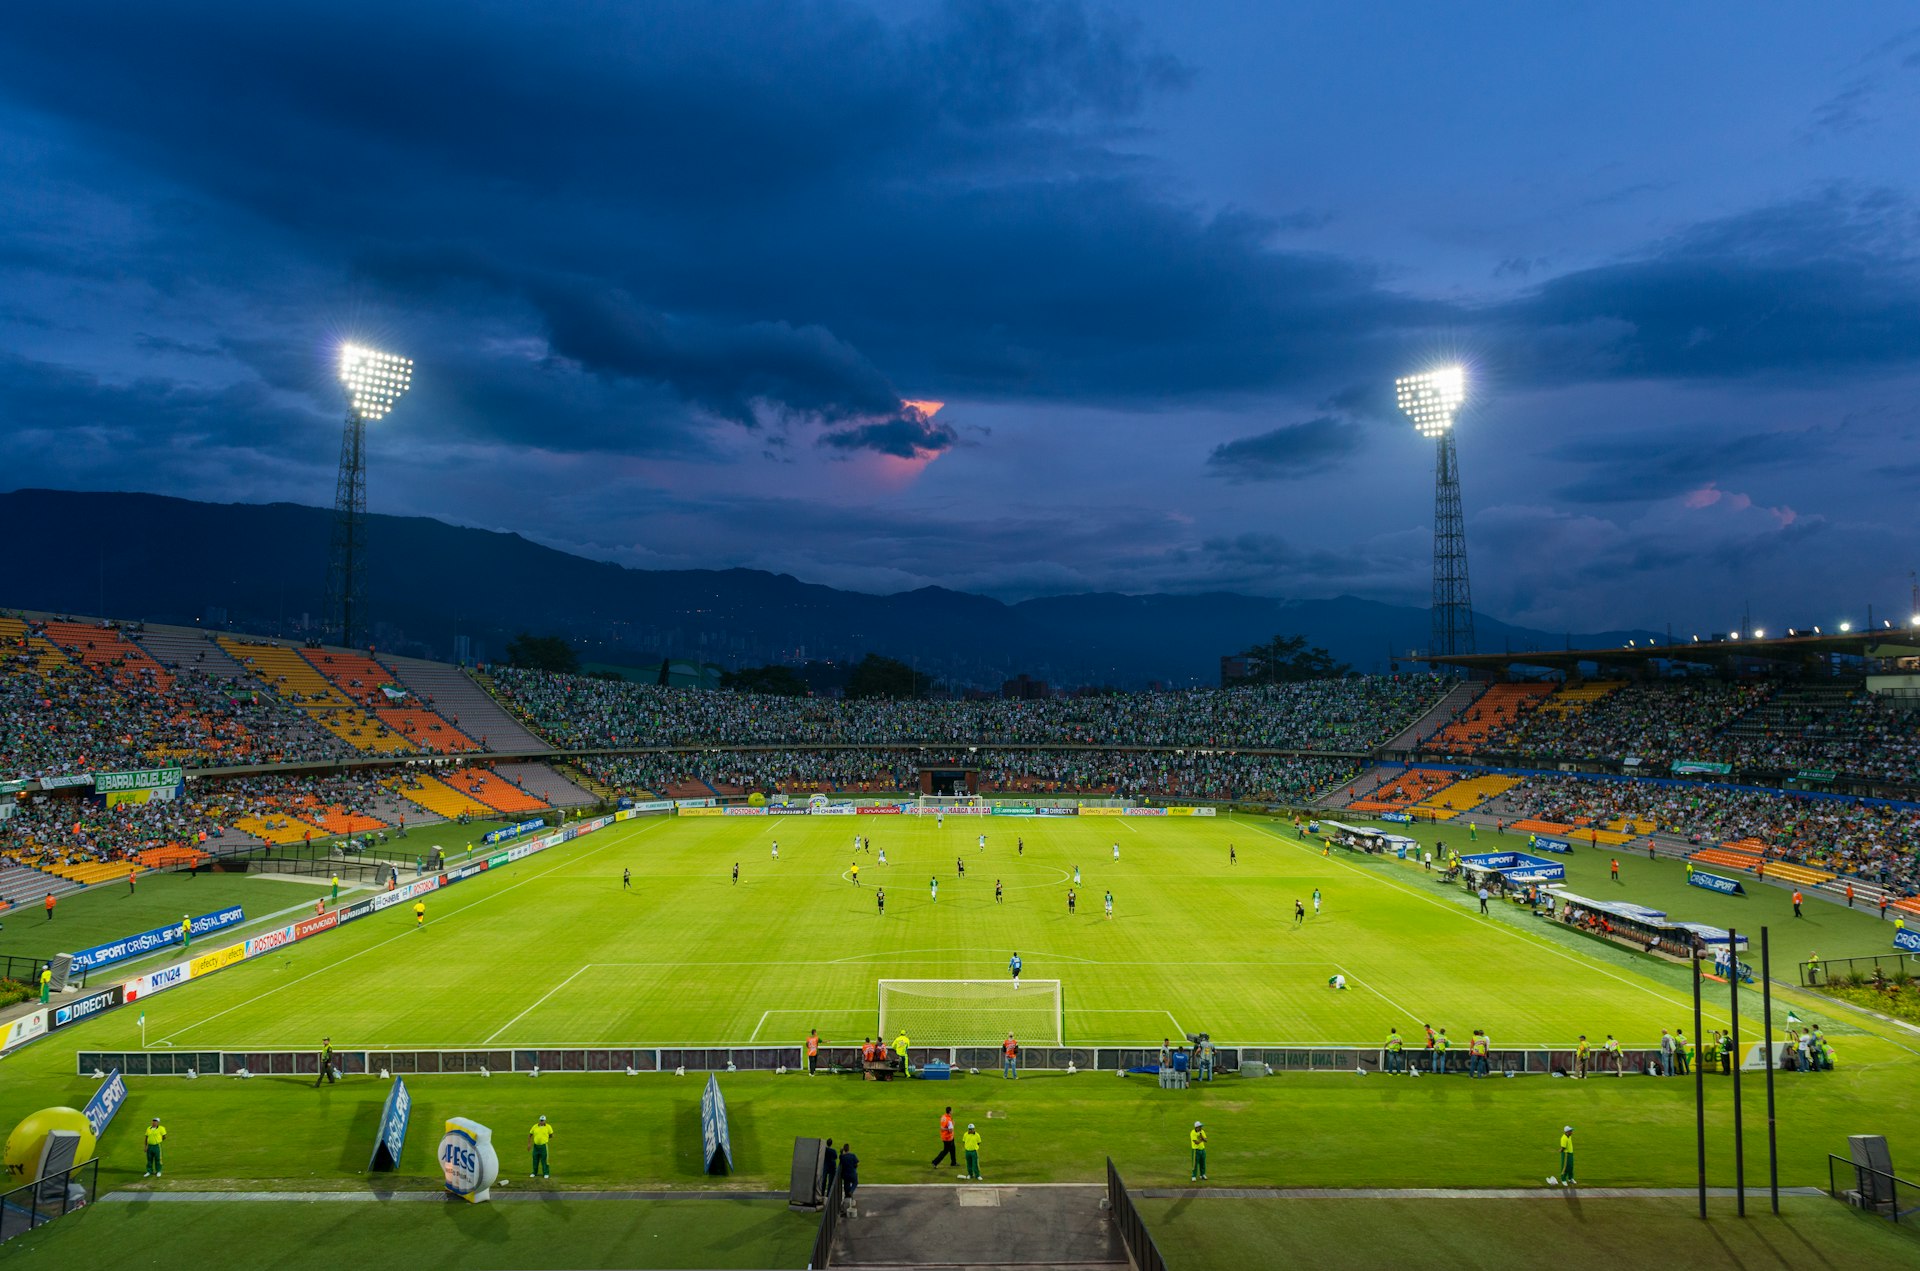 A shot taken within a stadium of players on a football field lit up by floodlights